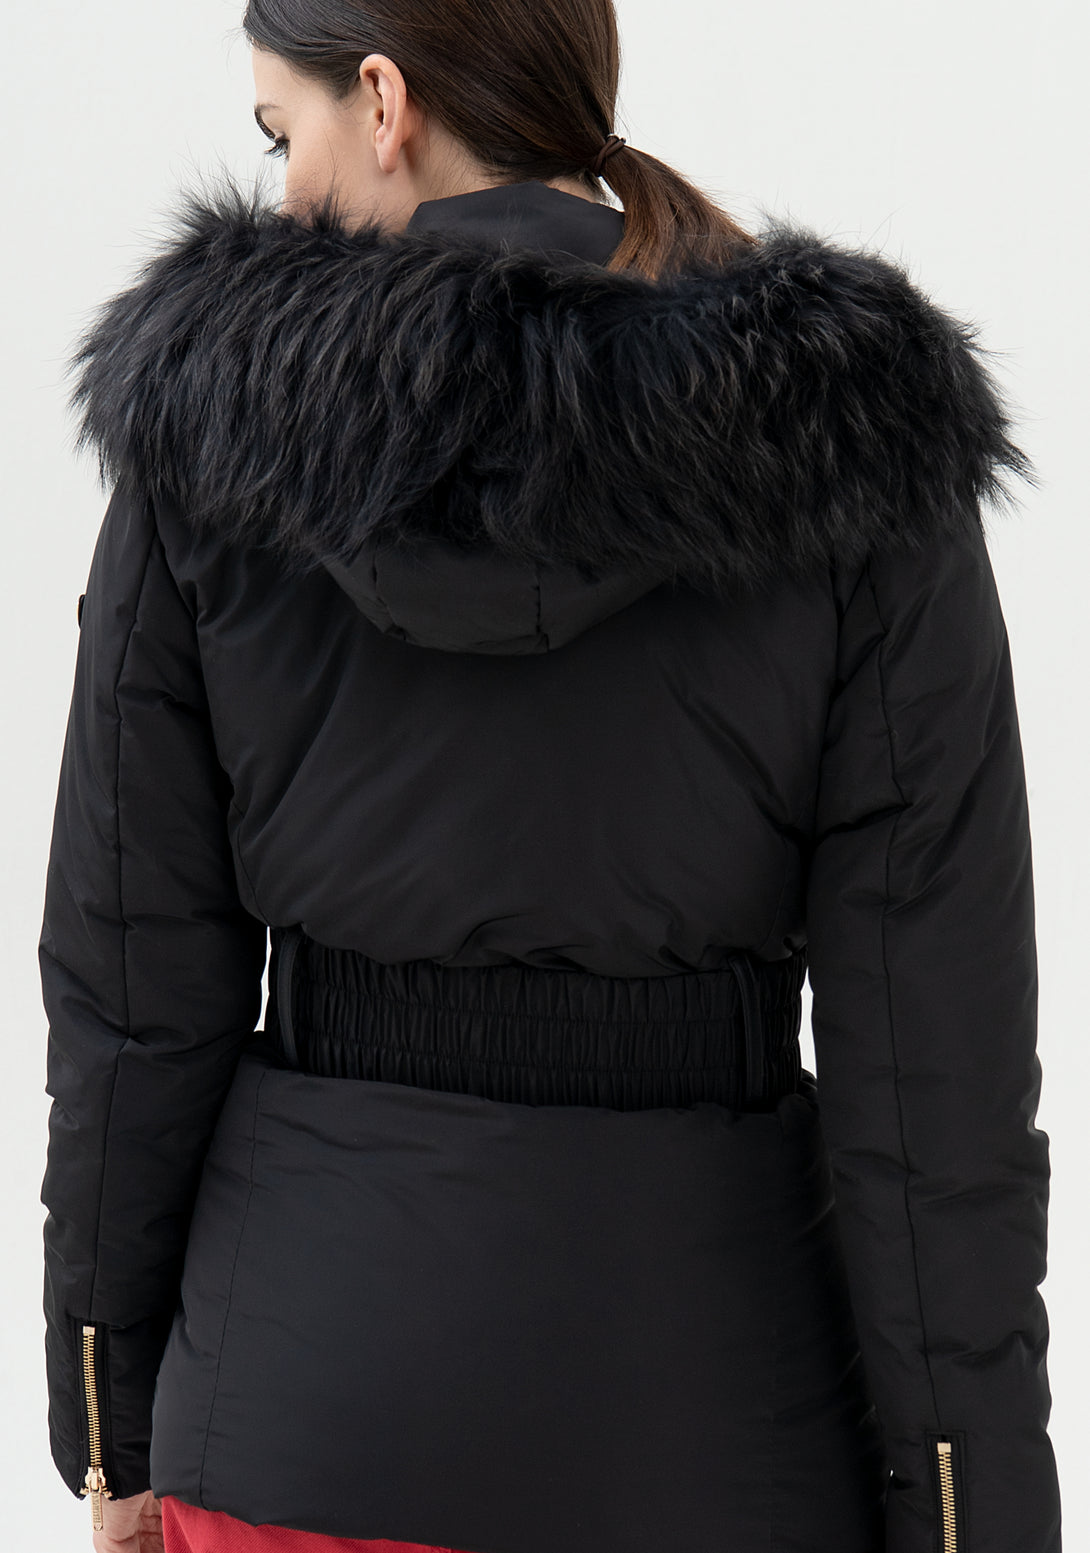 Padded jacket regular fit with racoon fur detail